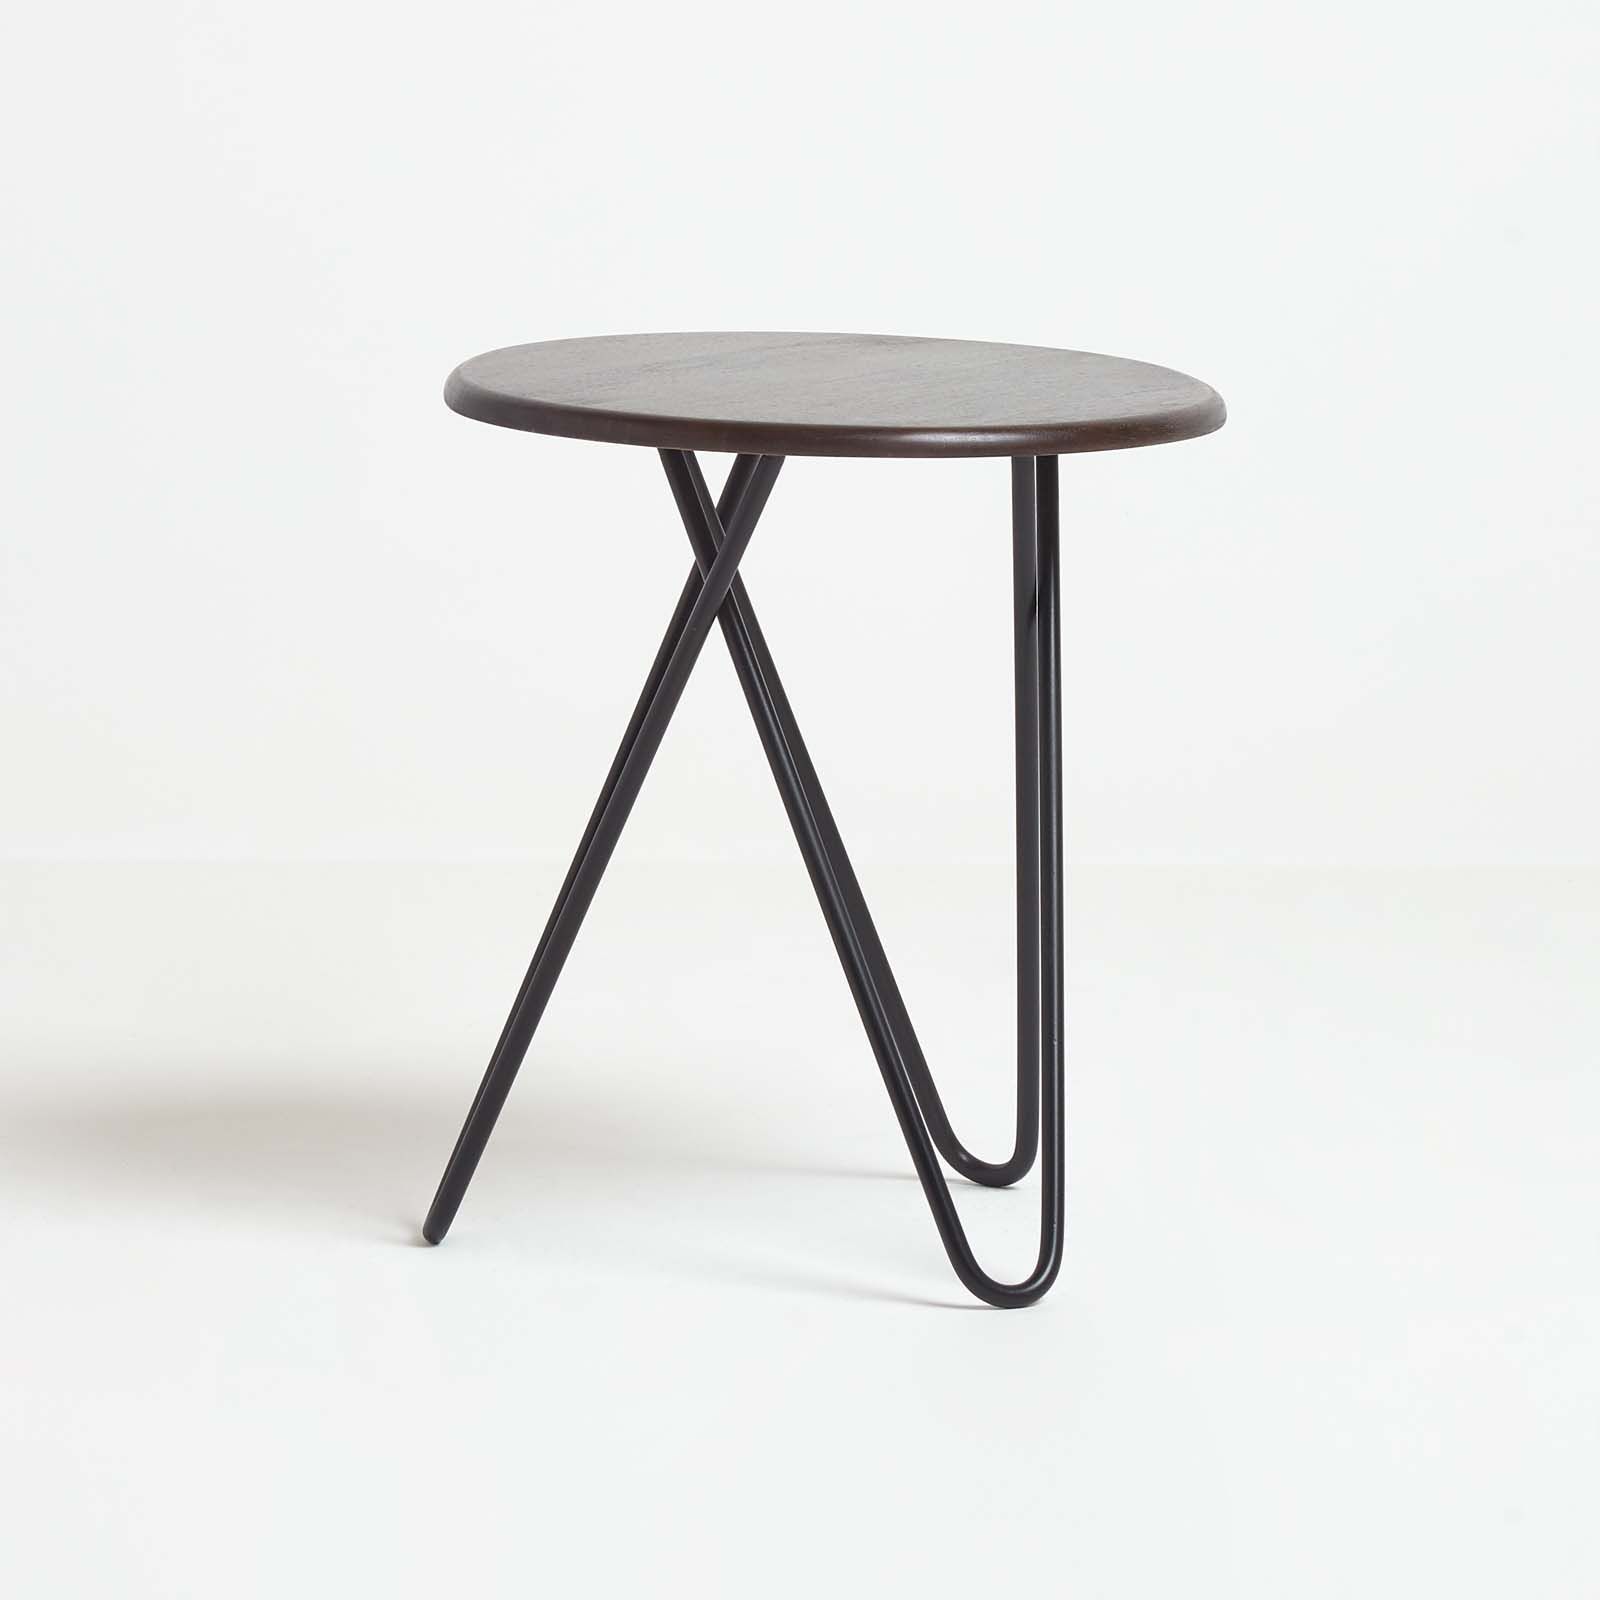 Soho Hairpin Leg Side Table, Dark With 2018 Coffee Tables With Tripod Legs (View 2 of 20)